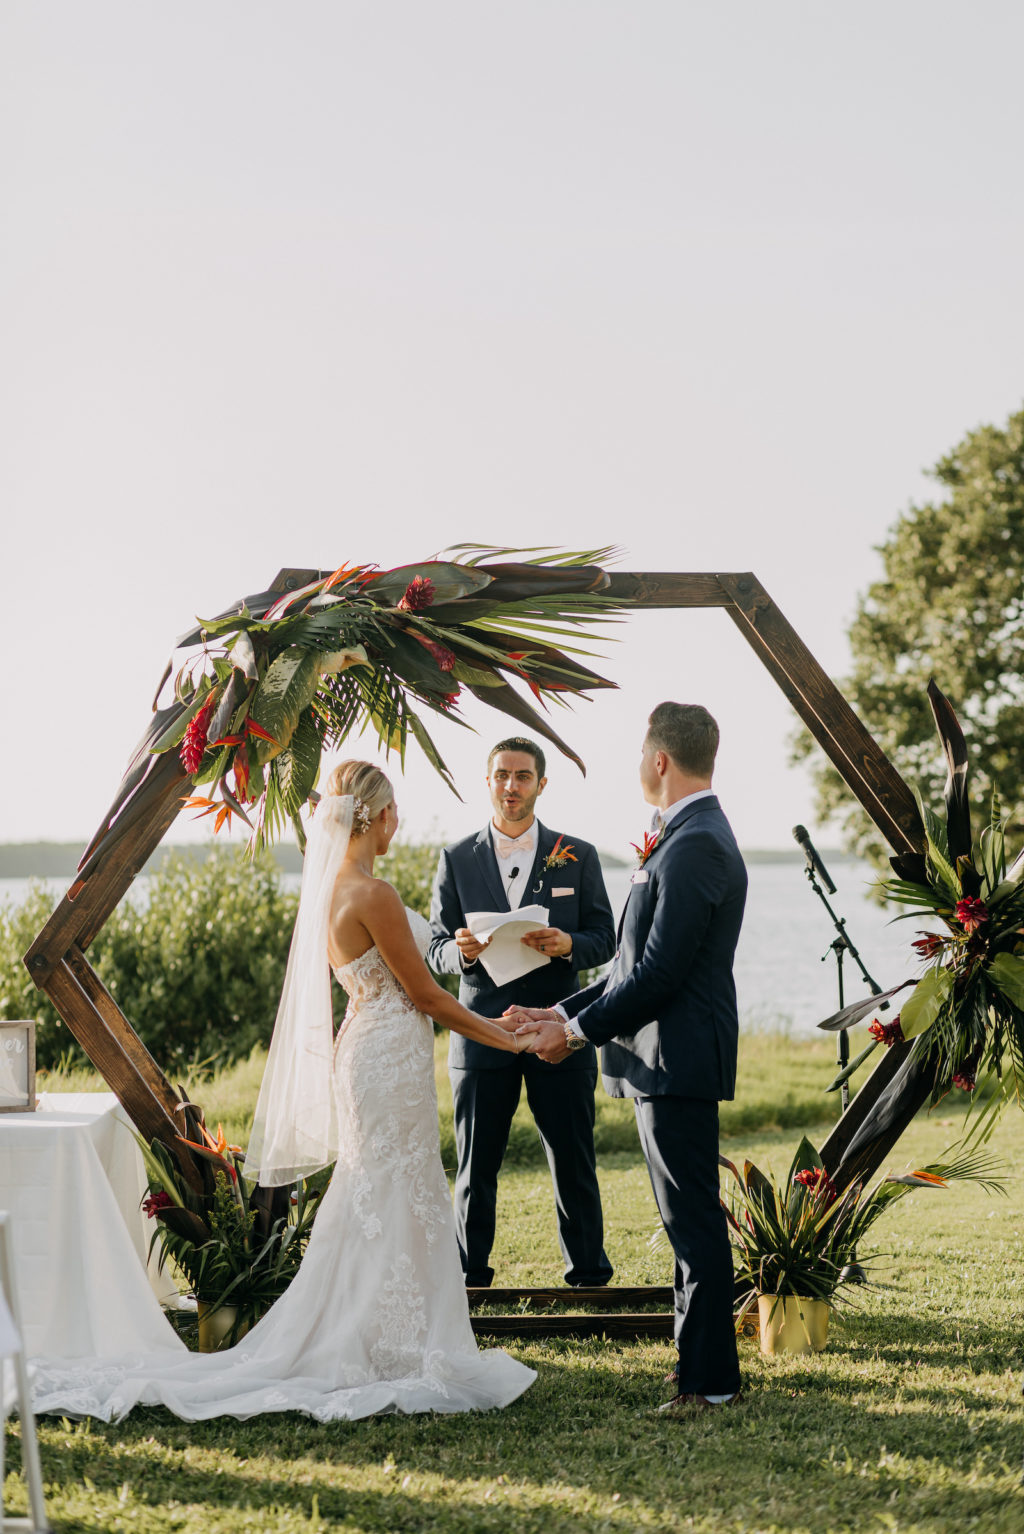 Tropical Elegant Bride and Groom Exchanging Wedding Ceremony Vows, Wooden Geometric Arch with Tropical Floral Arrangement | Tampa Bay Wedding Photographer Amber McWhorter Photography | Waterfront Wedding Venue Tampa Bay Watch